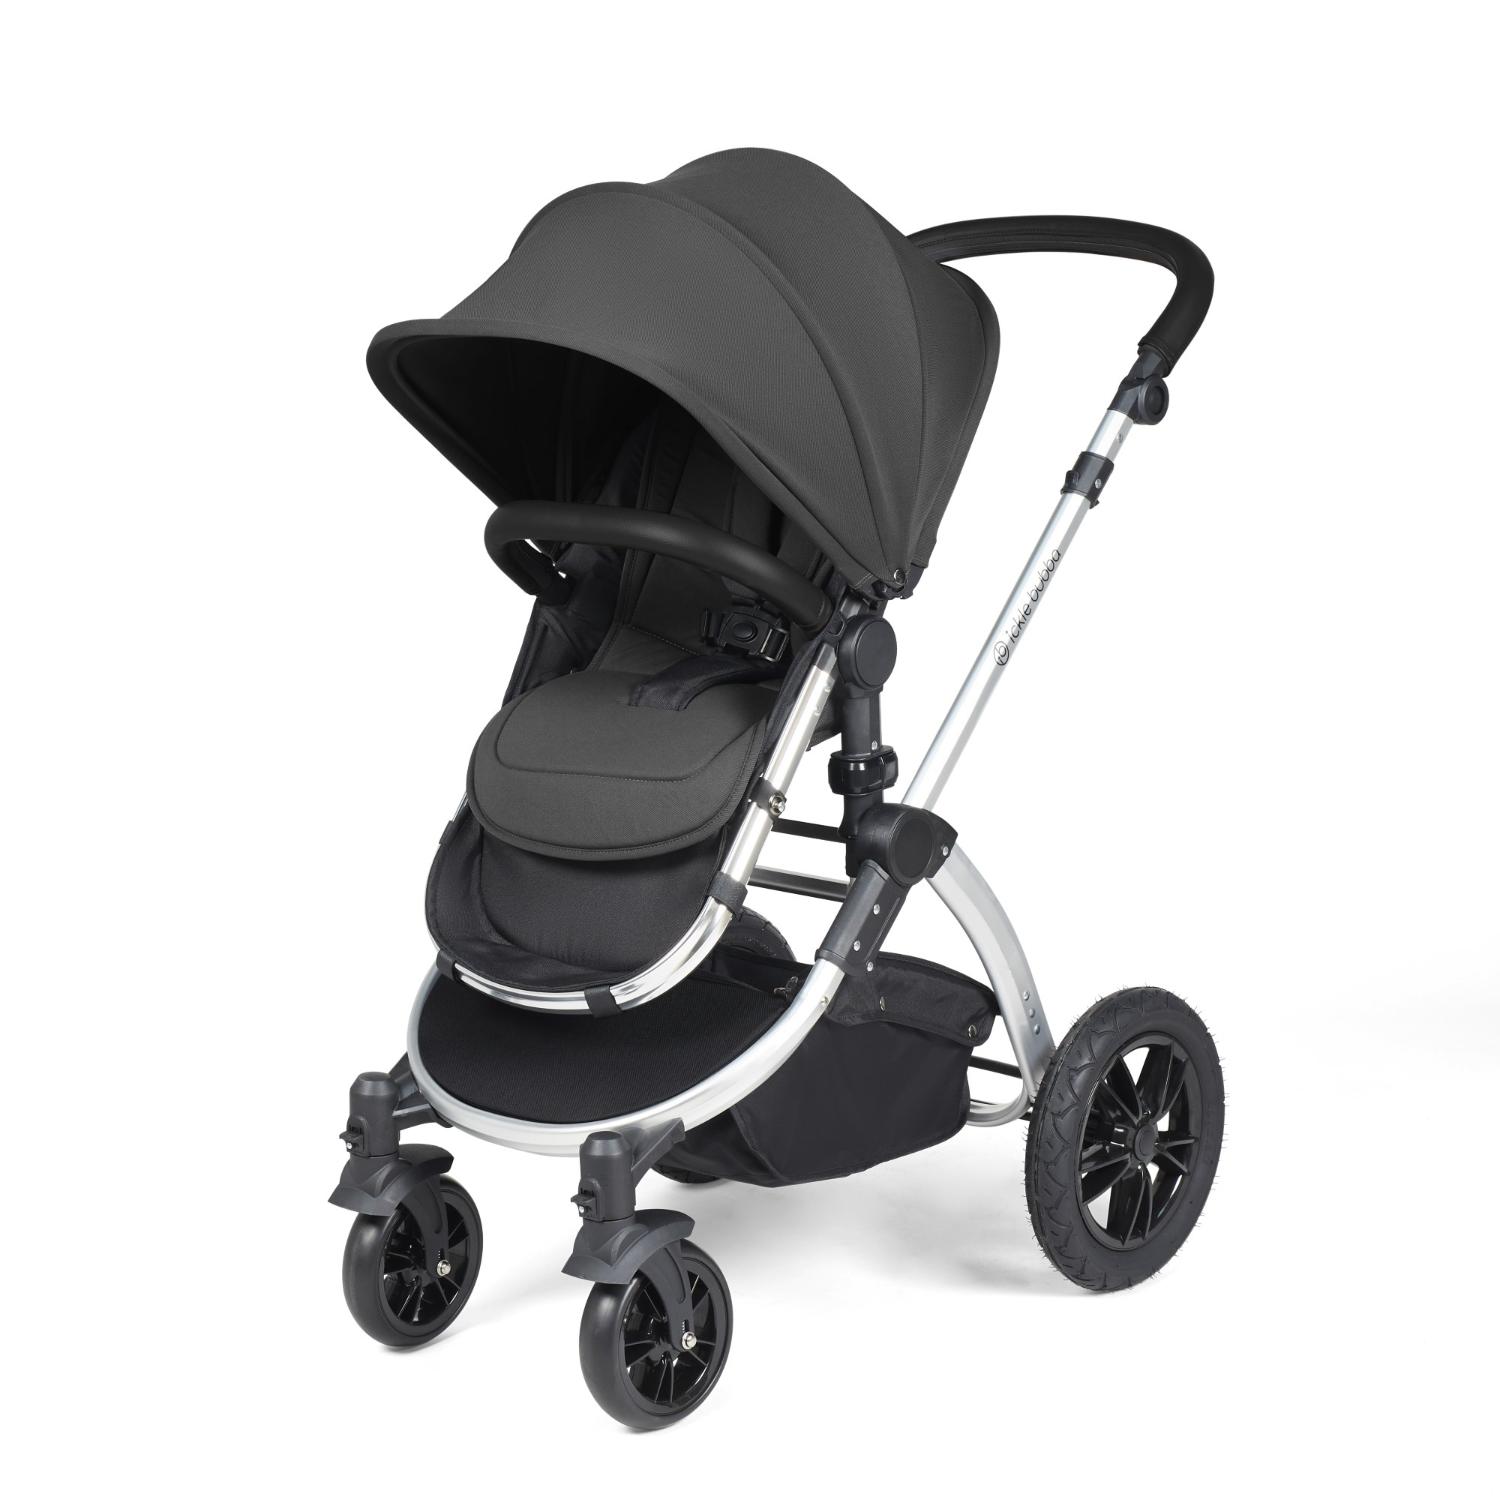 Ickle Bubba Stomp Luxe Pushchair with seat unit attached in Charcoal Grey colour with silver chassis